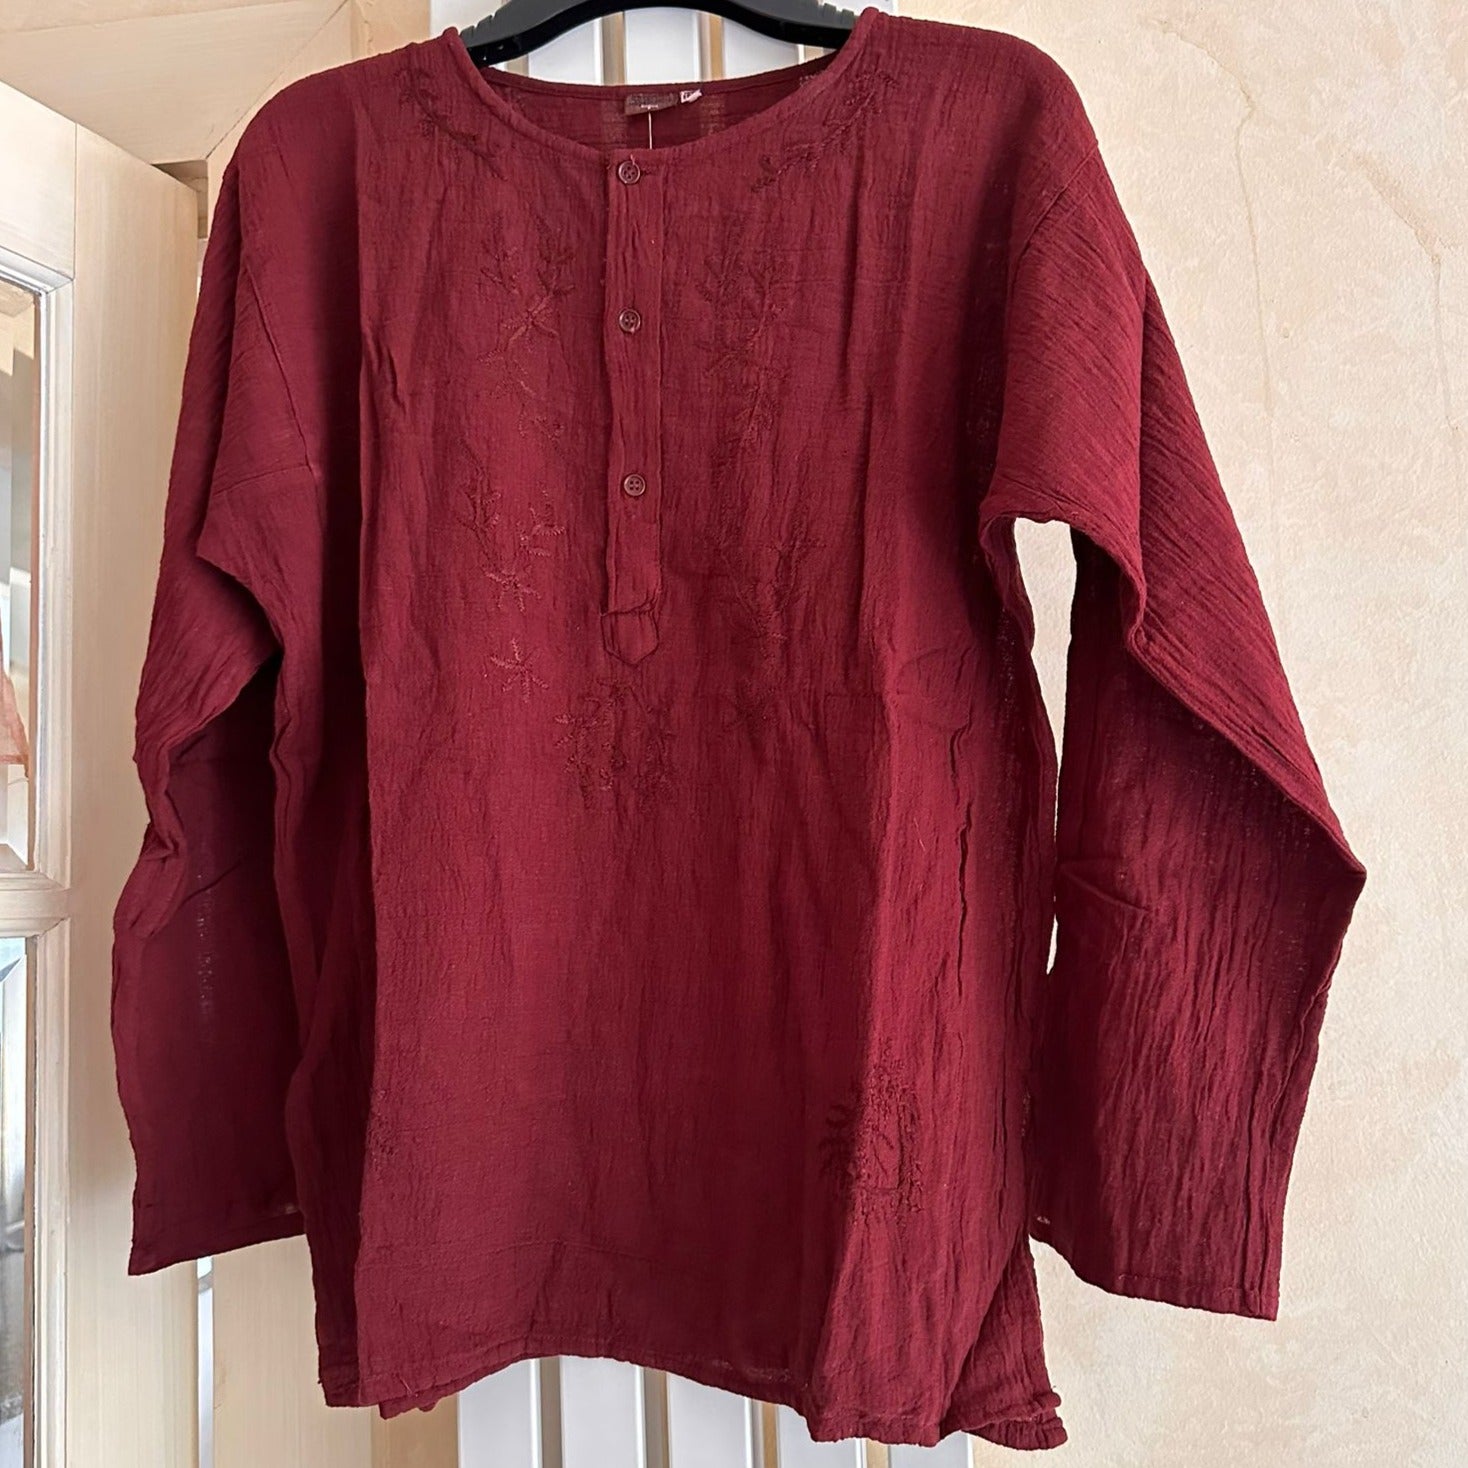 Cheesecloth Embroidered Kaftan Blouse - Burgundy